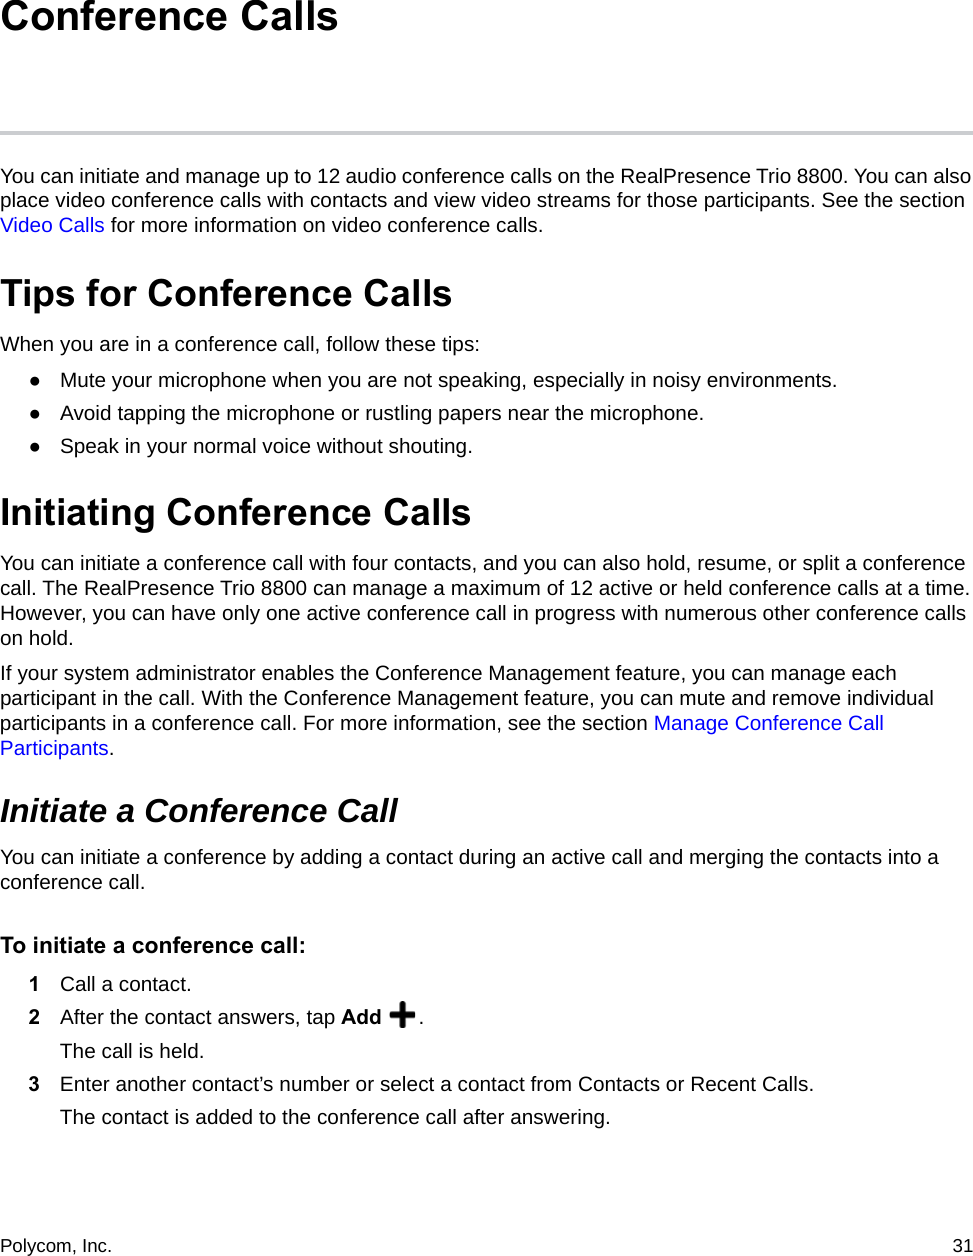 Polycom, Inc.  31 Conference CallsYou can initiate and manage up to 12 audio conference calls on the RealPresence Trio 8800. You can also place video conference calls with contacts and view video streams for those participants. See the section Video Calls for more information on video conference calls.Tips for Conference CallsWhen you are in a conference call, follow these tips:●Mute your microphone when you are not speaking, especially in noisy environments.●Avoid tapping the microphone or rustling papers near the microphone.●Speak in your normal voice without shouting.Initiating Conference CallsYou can initiate a conference call with four contacts, and you can also hold, resume, or split a conference call. The RealPresence Trio 8800 can manage a maximum of 12 active or held conference calls at a time. However, you can have only one active conference call in progress with numerous other conference calls on hold.If your system administrator enables the Conference Management feature, you can manage each participant in the call. With the Conference Management feature, you can mute and remove individual participants in a conference call. For more information, see the section Manage Conference Call Participants.Initiate a Conference CallYou can initiate a conference by adding a contact during an active call and merging the contacts into a conference call. To initiate a conference call:1Call a contact.2After the contact answers, tap Add  .The call is held.3Enter another contact’s number or select a contact from Contacts or Recent Calls.The contact is added to the conference call after answering.